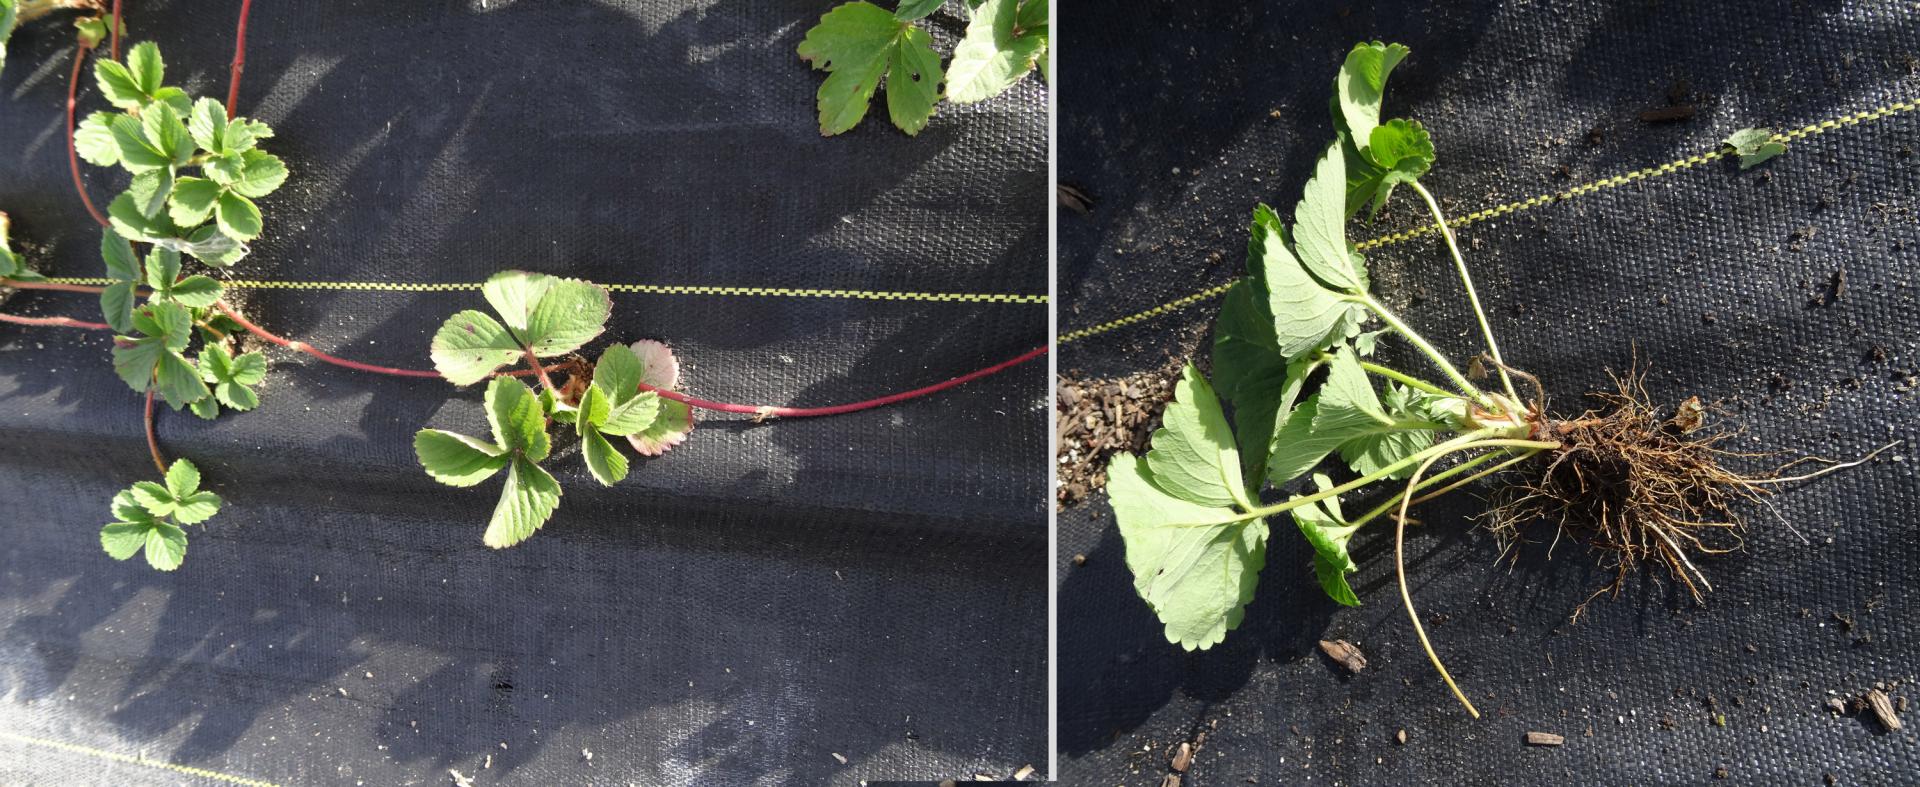 Figure 3. Stolons rooting in the fabric.